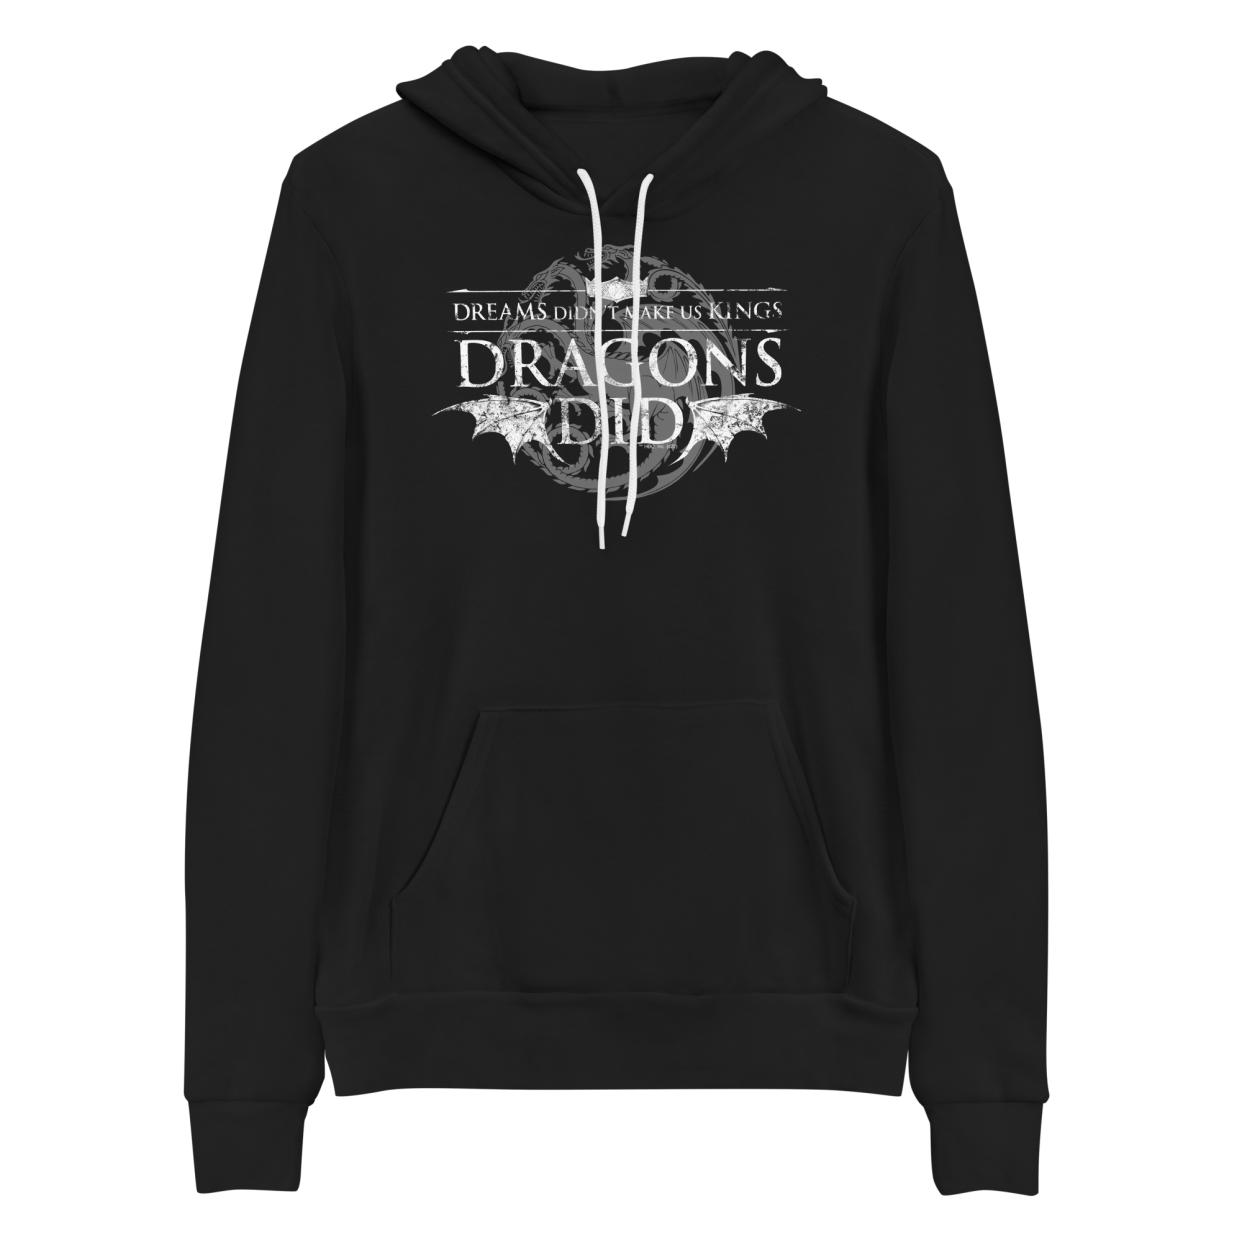 A House of the Dragons hoodie is among the new merch for the Game of Thrones prequel available at the WB Shop. (Photo: Courtesy of WB Shop)